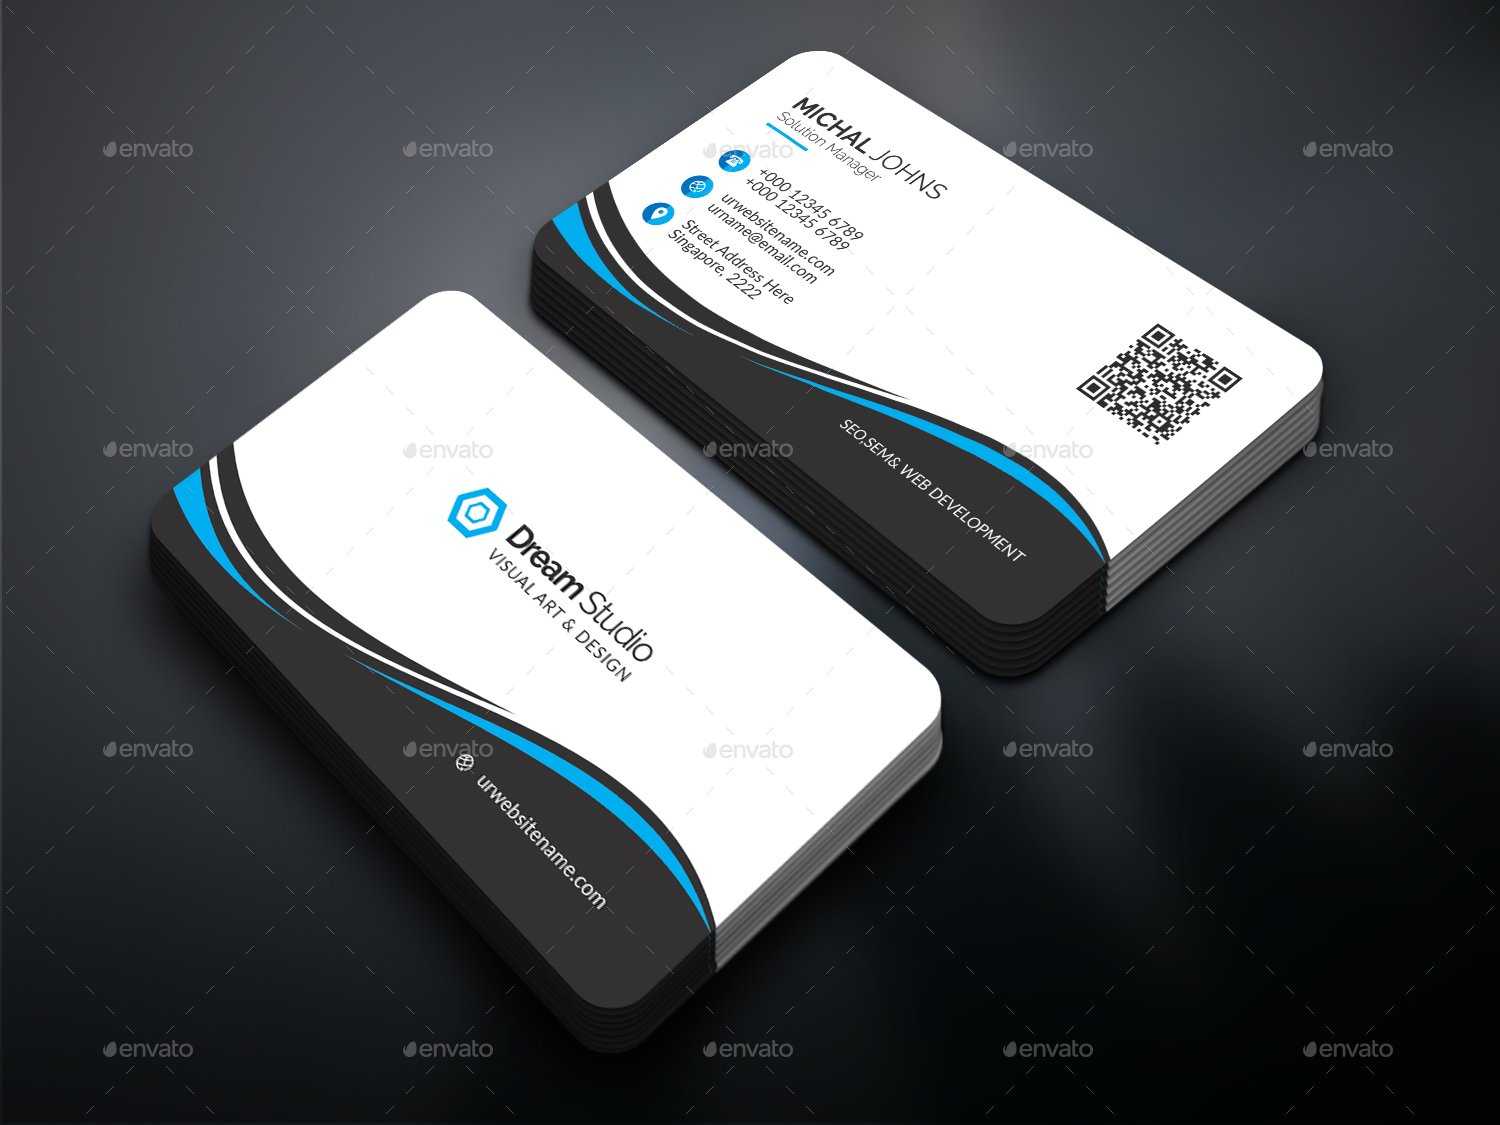 30 Free Psd Business Cards Templates For Powerful Business With Regard To Visiting Card Templates Psd Free Download